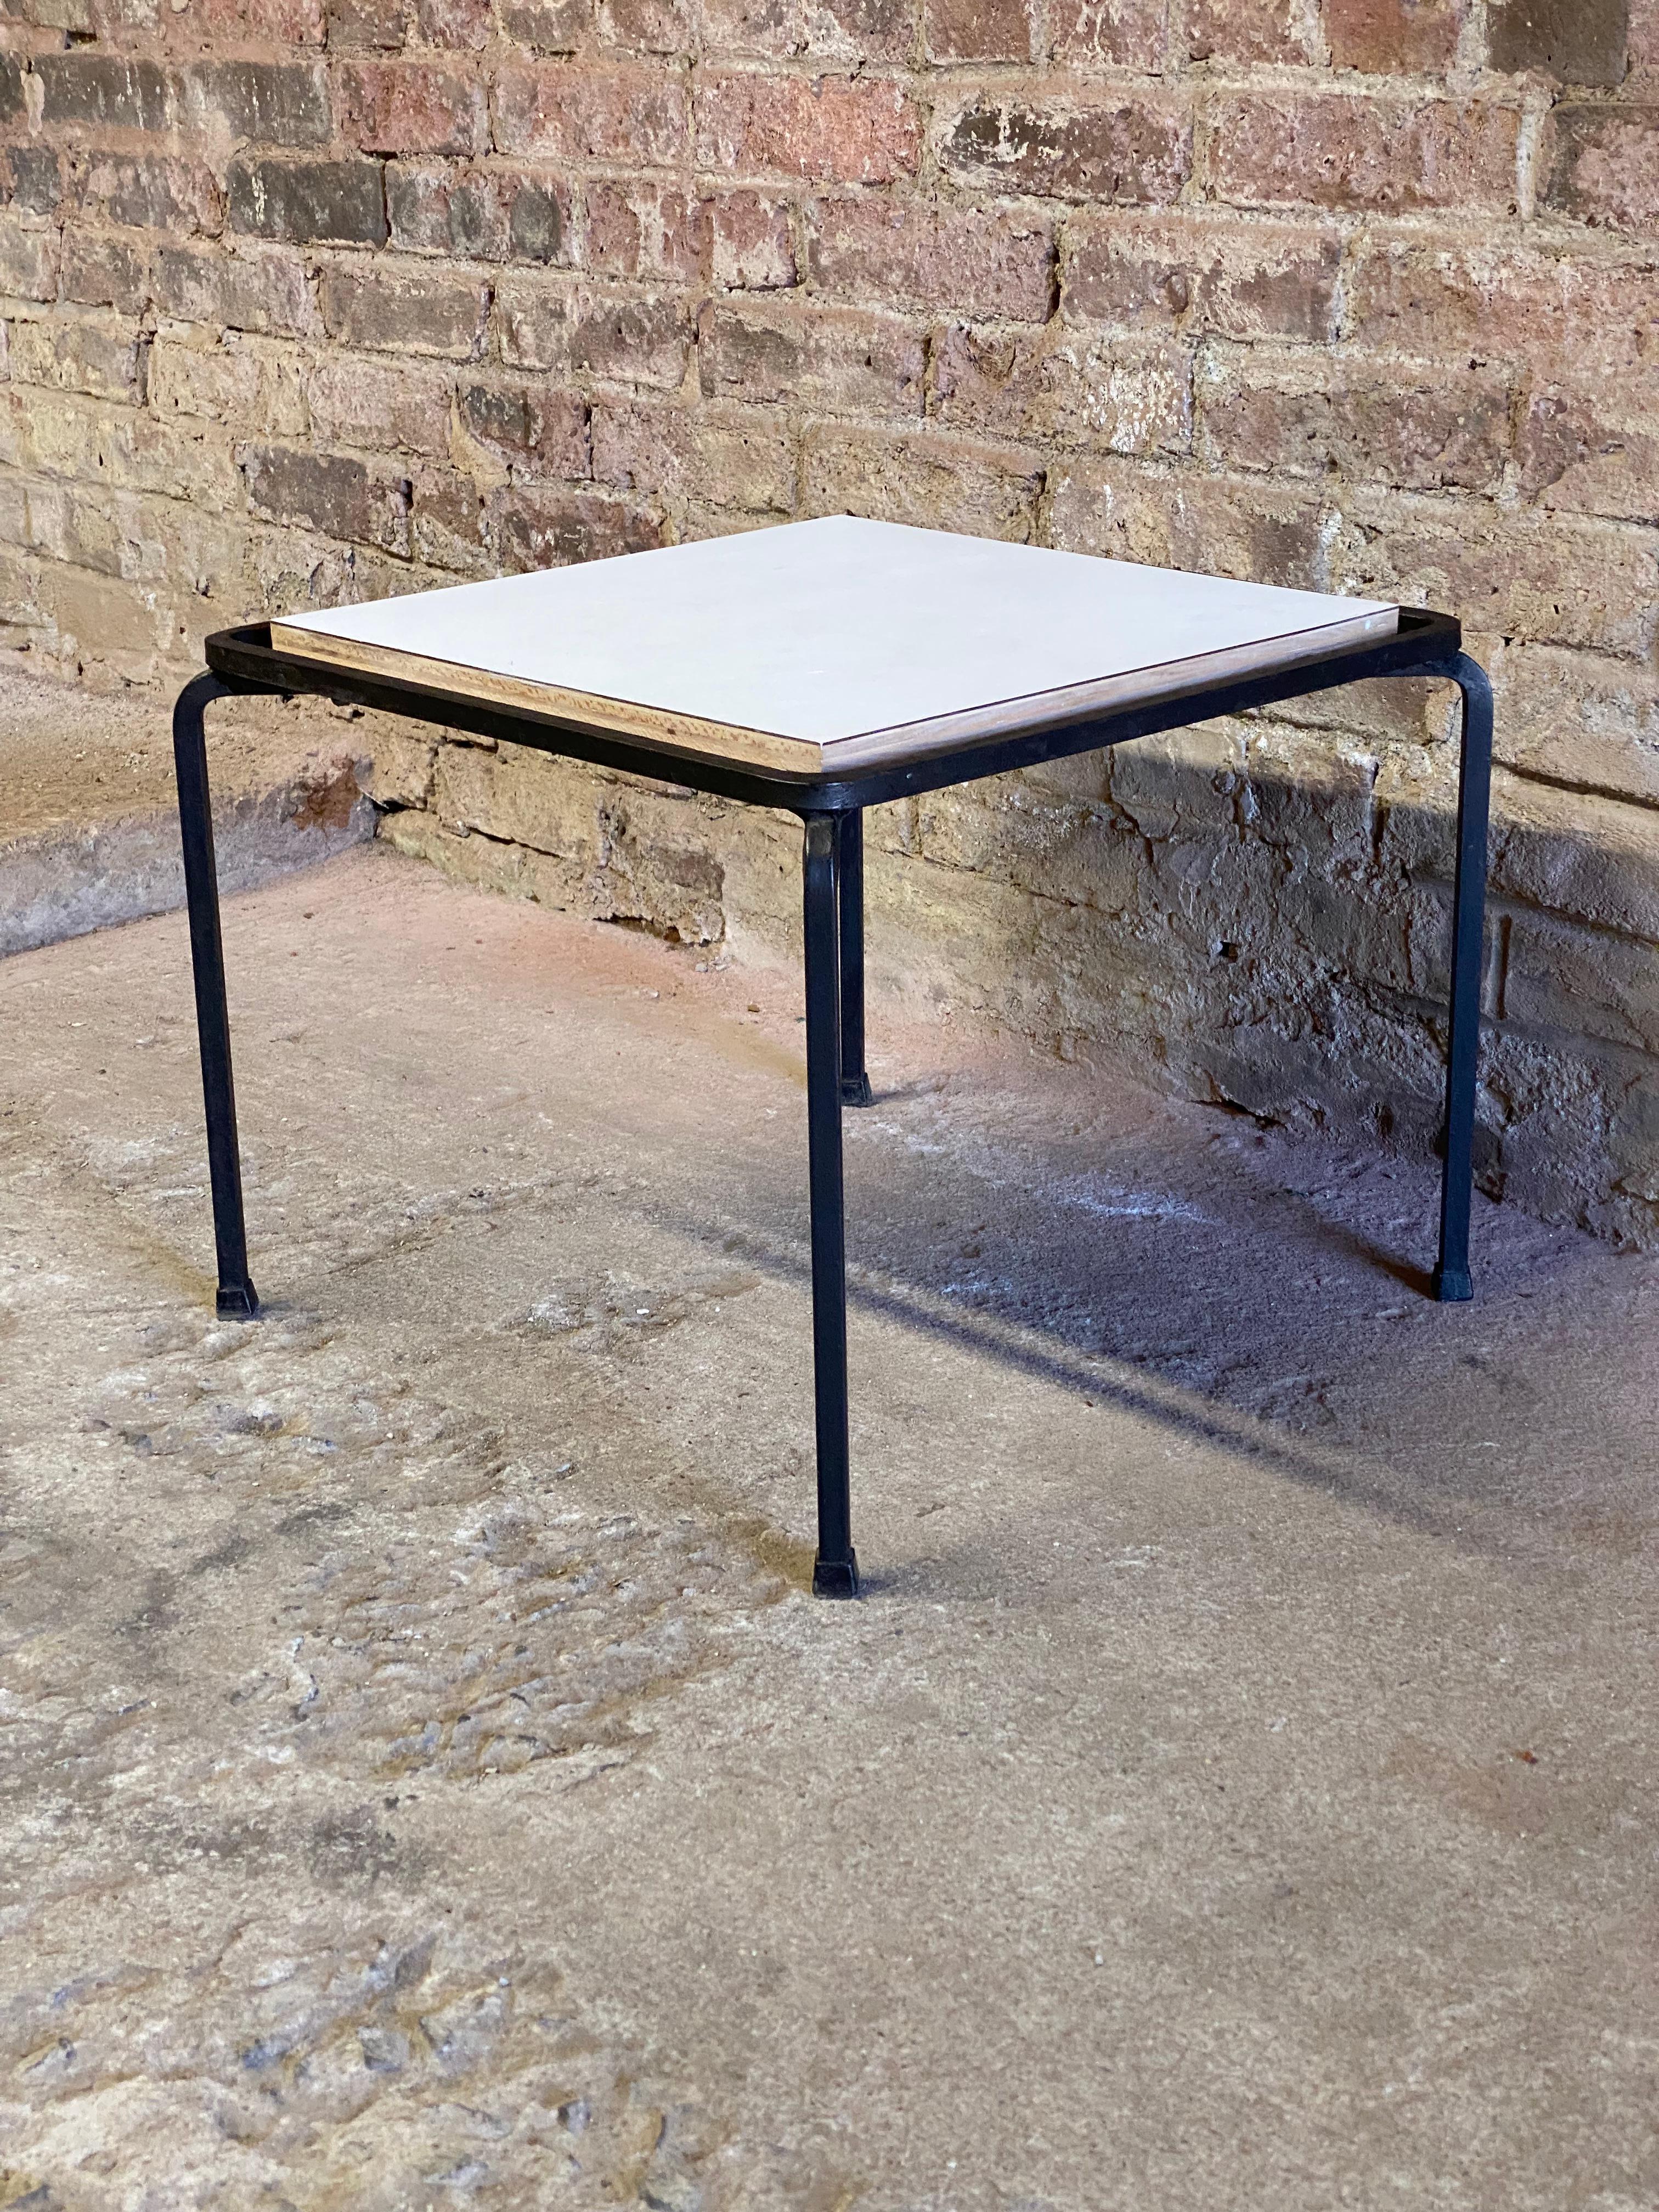 Allan Gould for Reilly-Wolff white laminate top and iron base end table. Circa 1950-60. Structurally sound and sturdy construction. Good overall condition with some light scratches to laminate top. Minor edge wear. Wear commensurate with age and